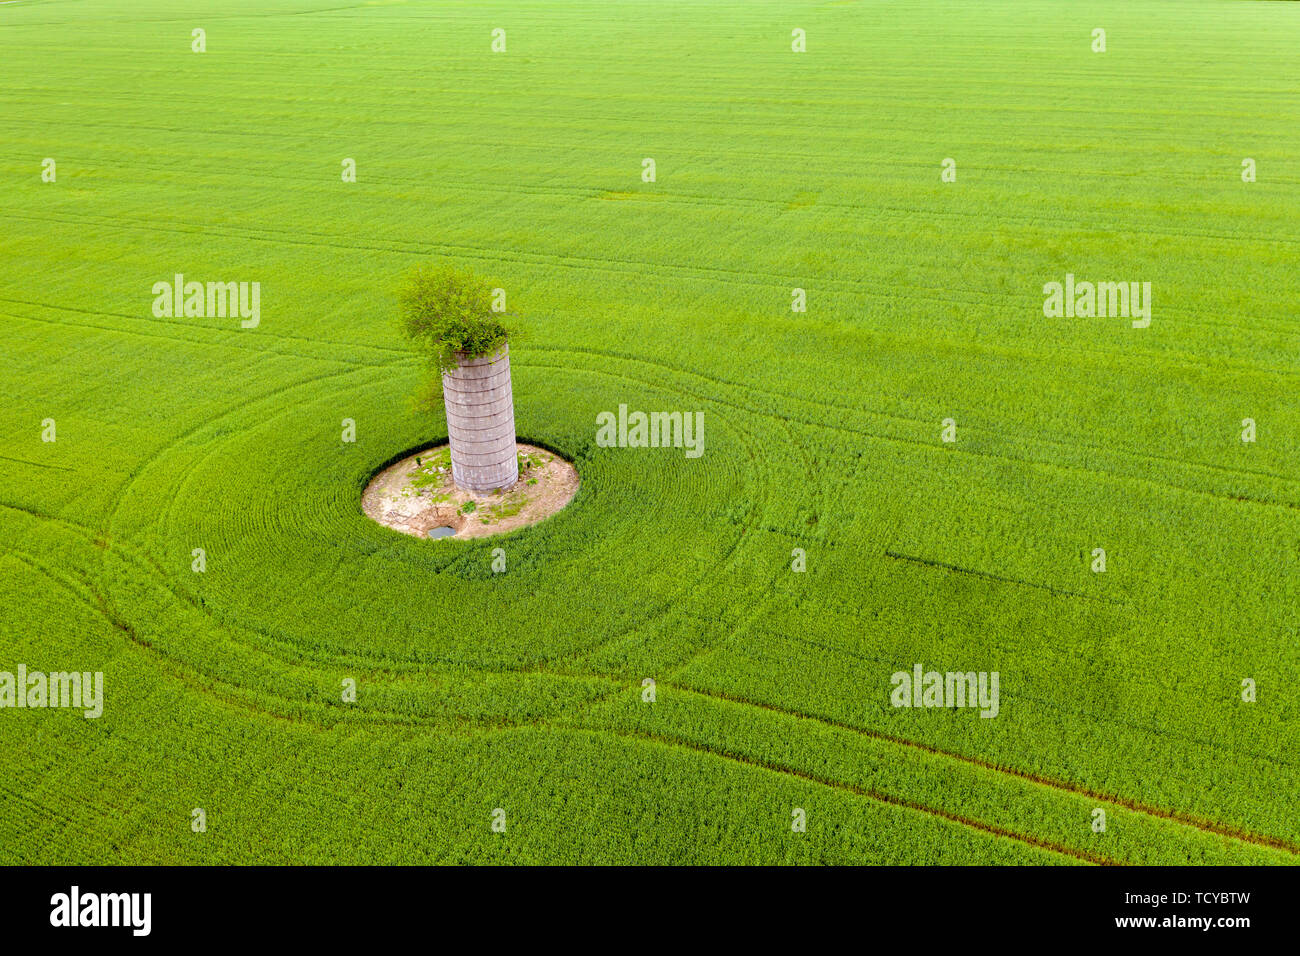 Mt Vernon, Illinois - A tree grows out of the top of an old silo in a farm field. Stock Photo